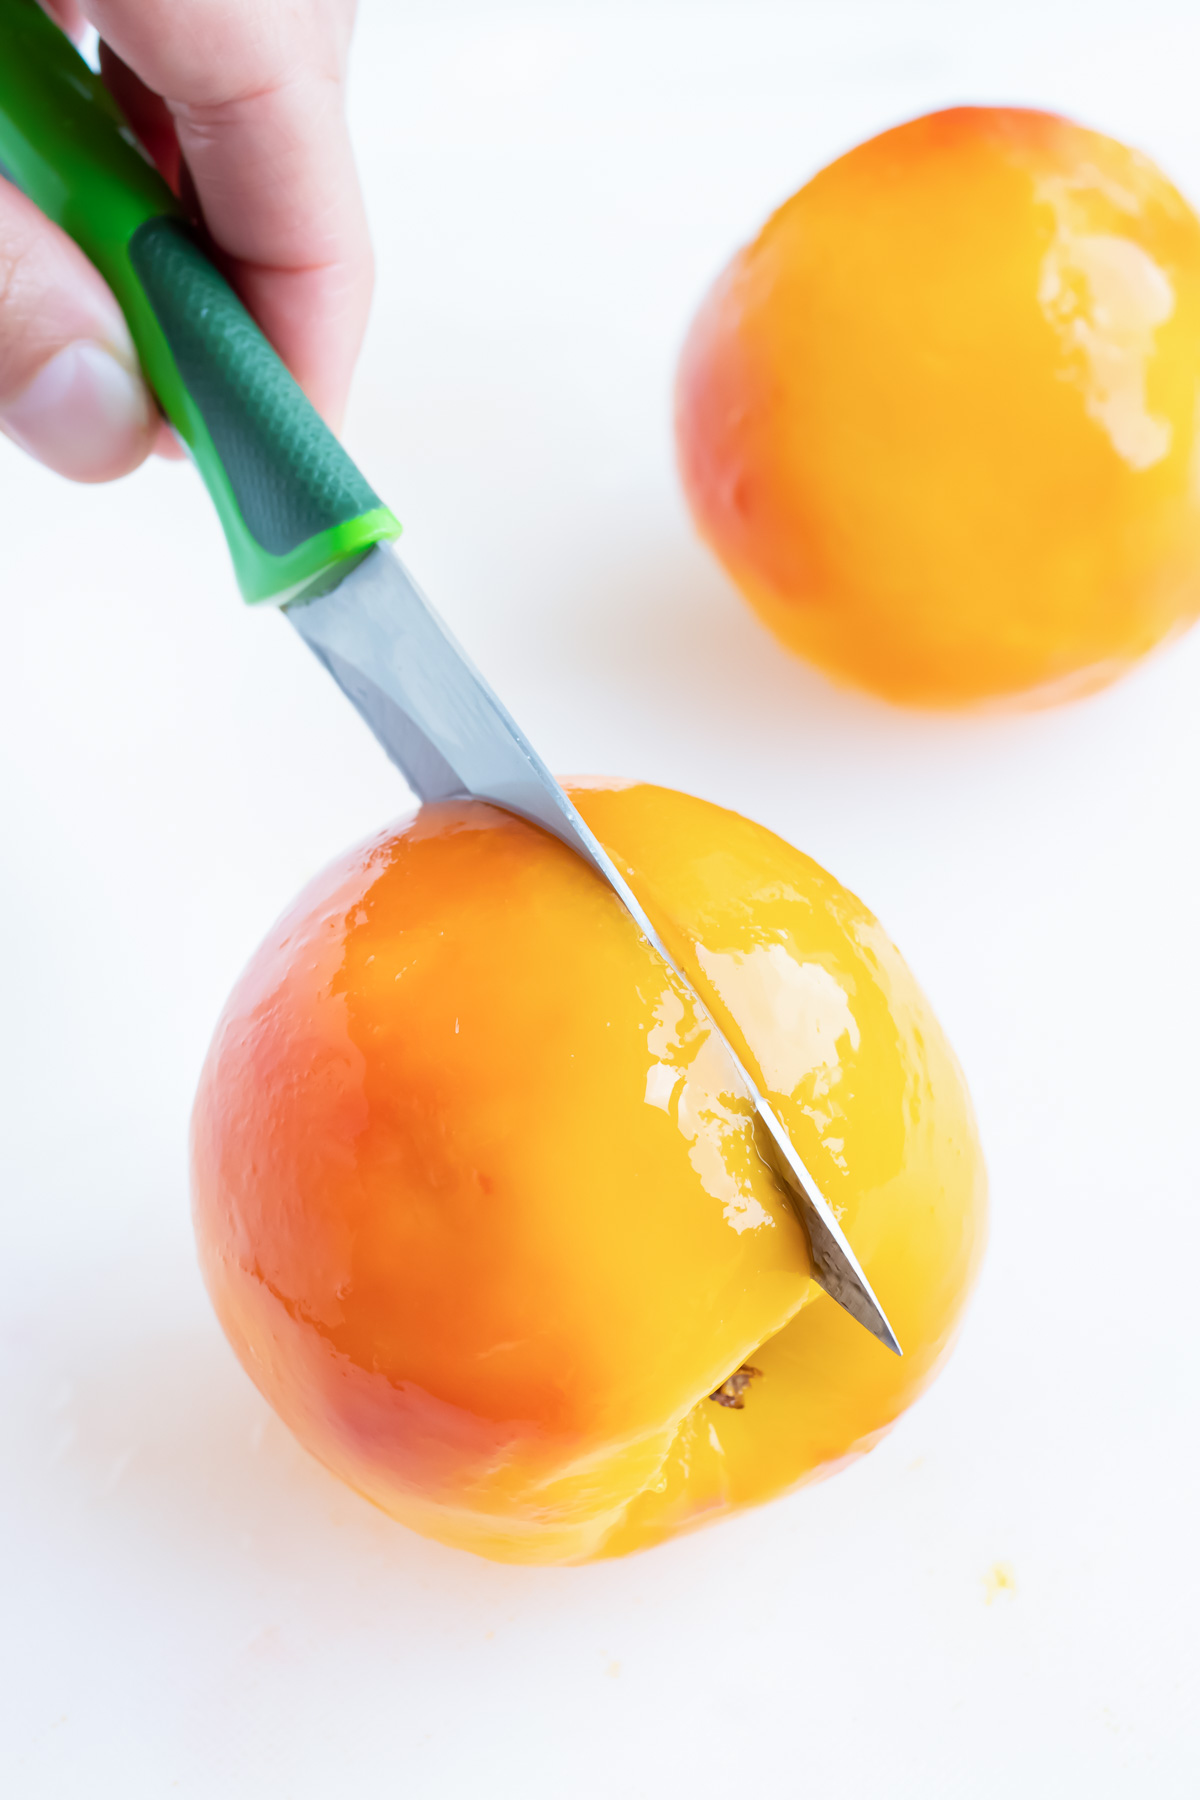 Using a paring knife, slice the fruit in half after it is peeled.